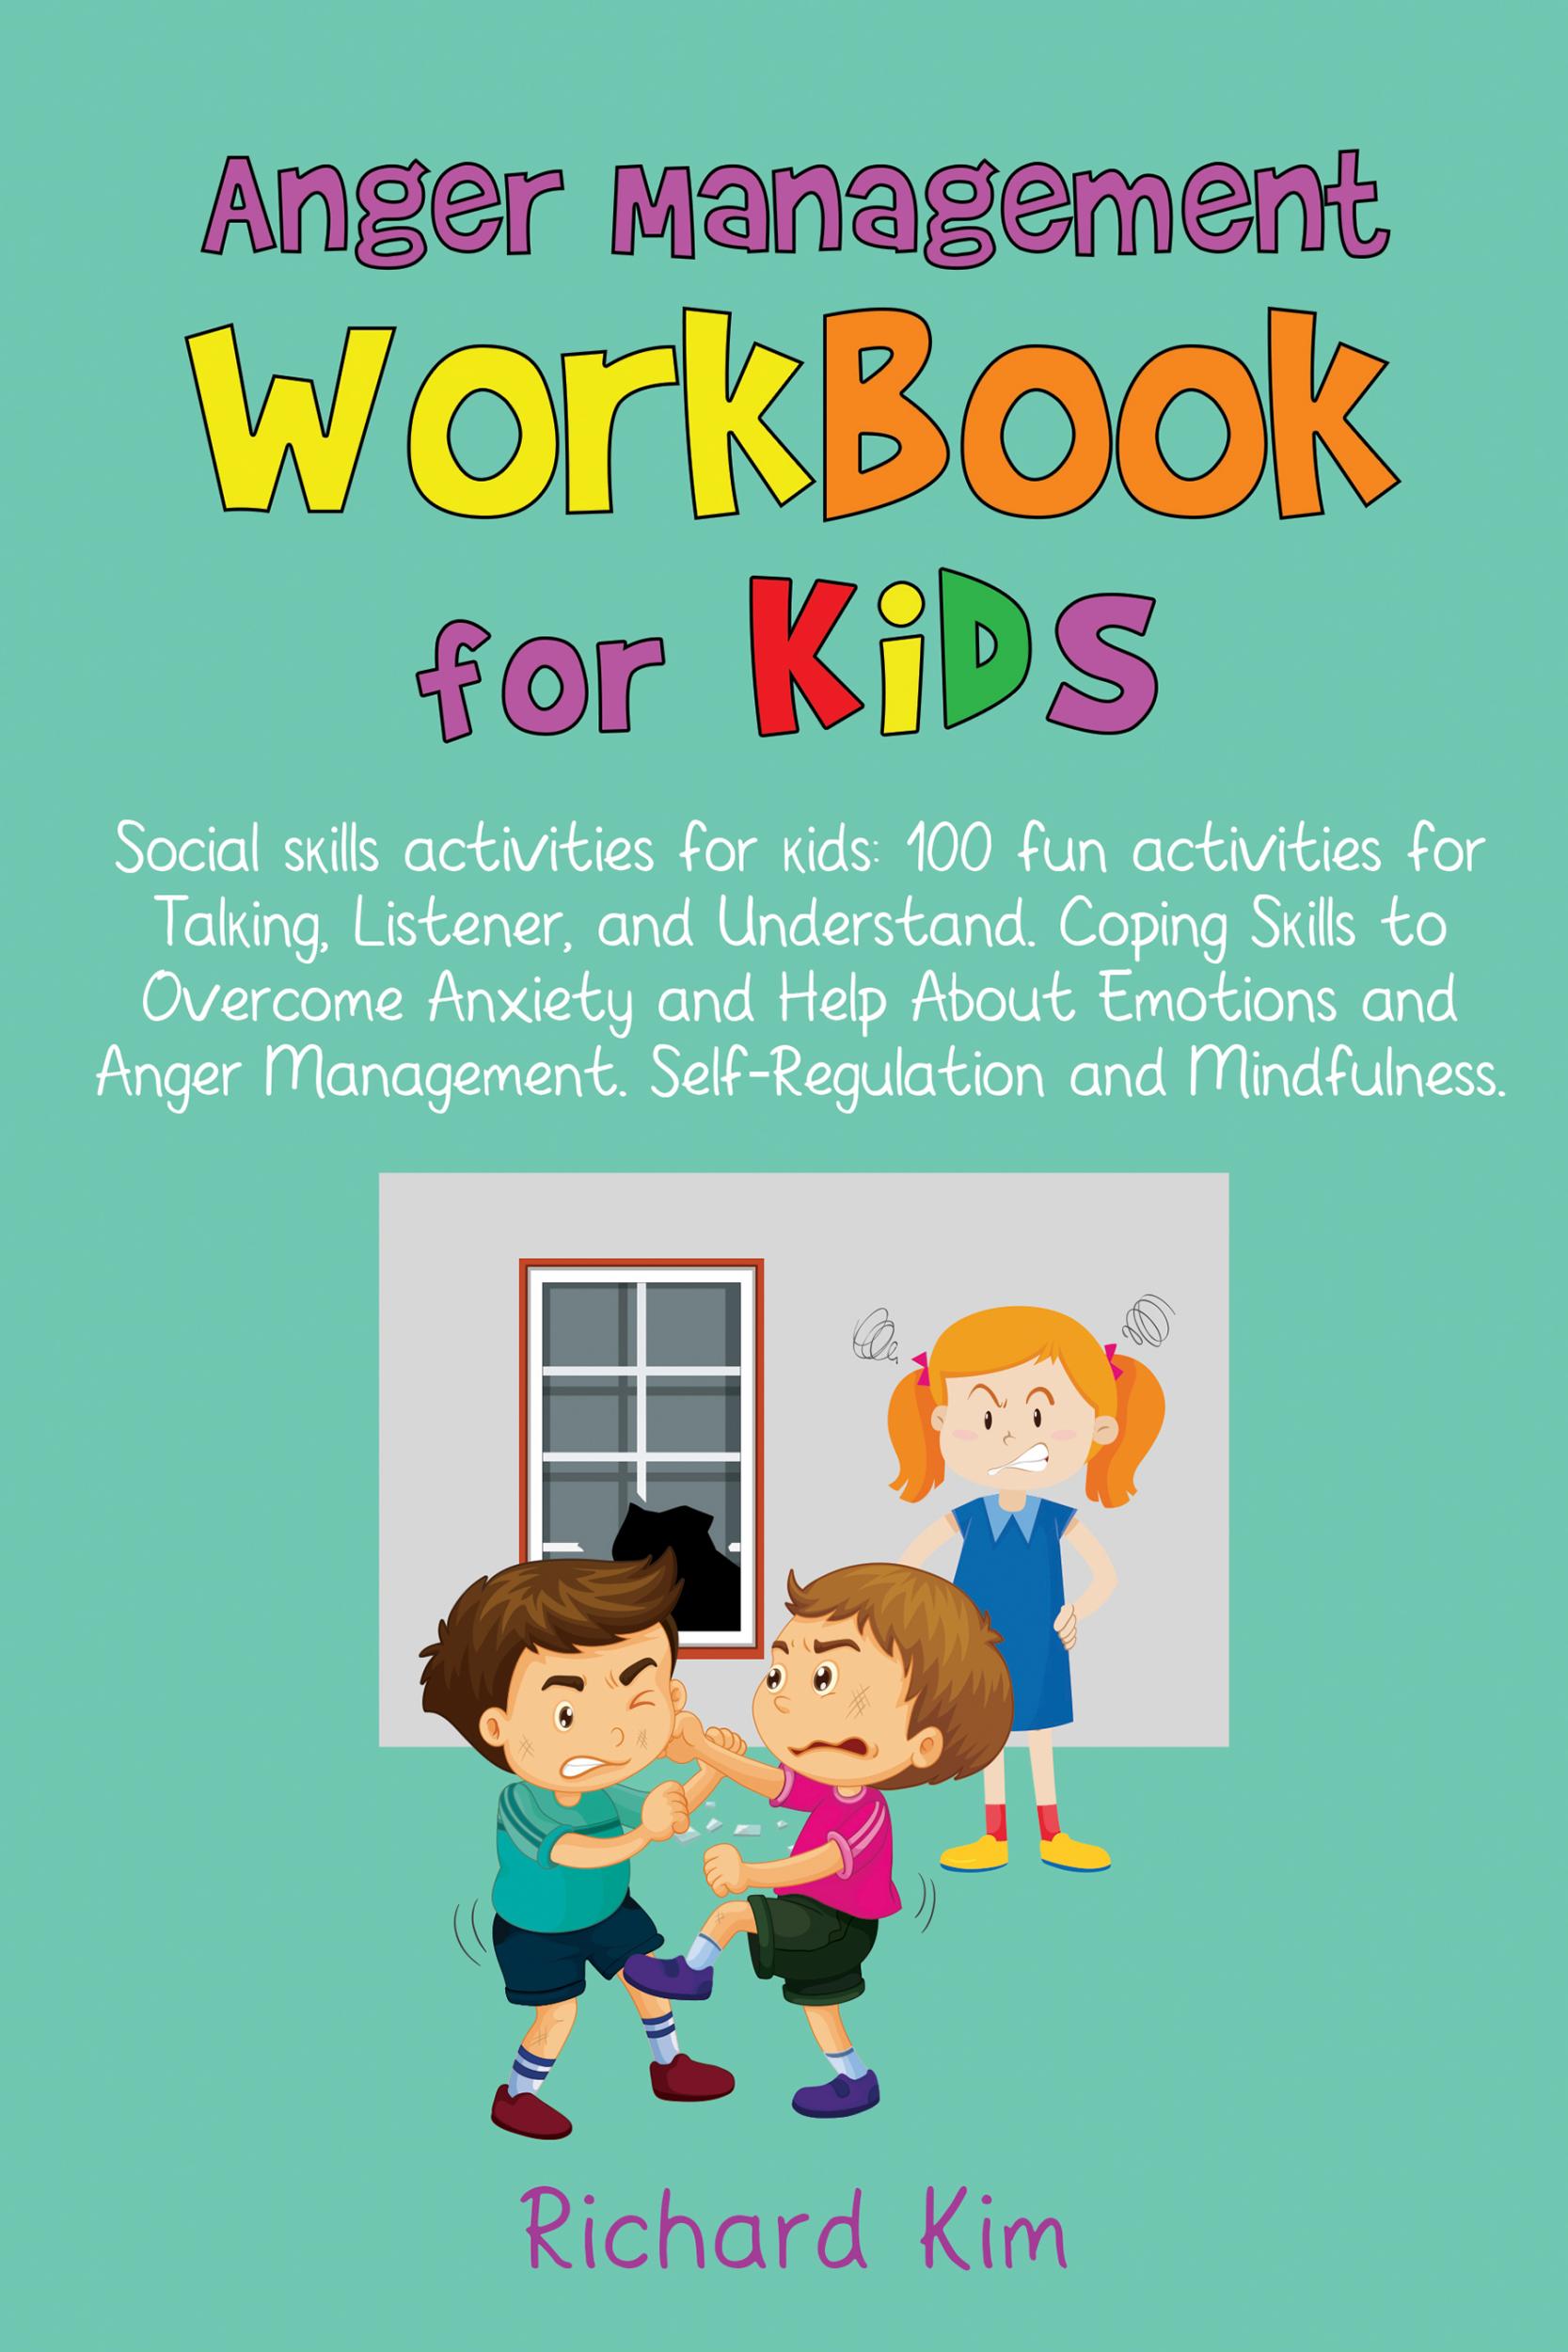 Get your free copy of Anger Management Workbook for Kids